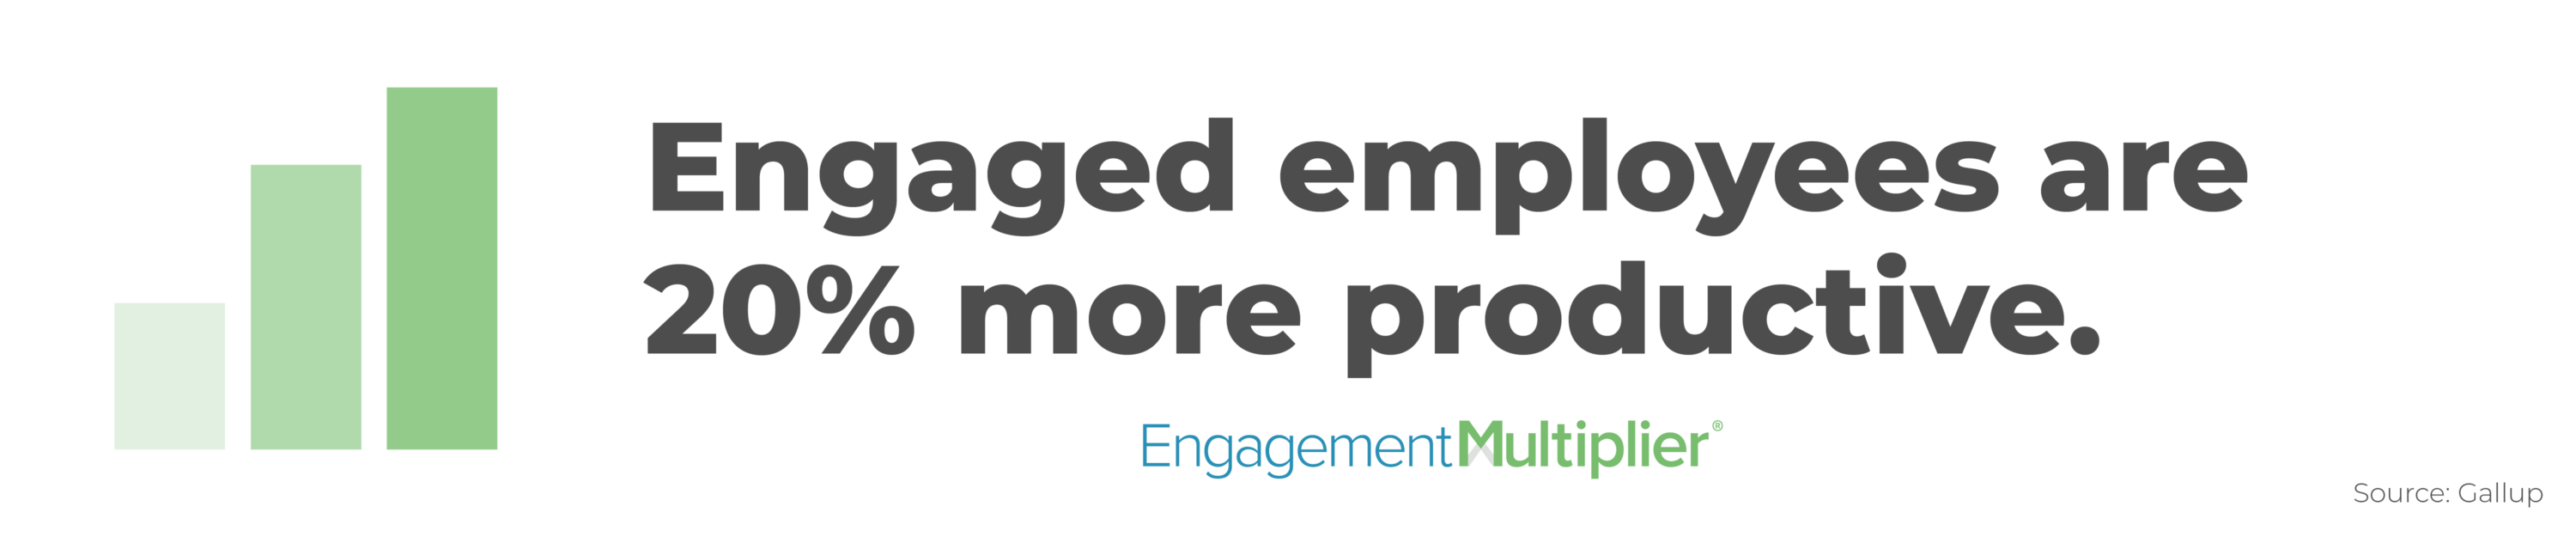 engaged employees are 20% more productive